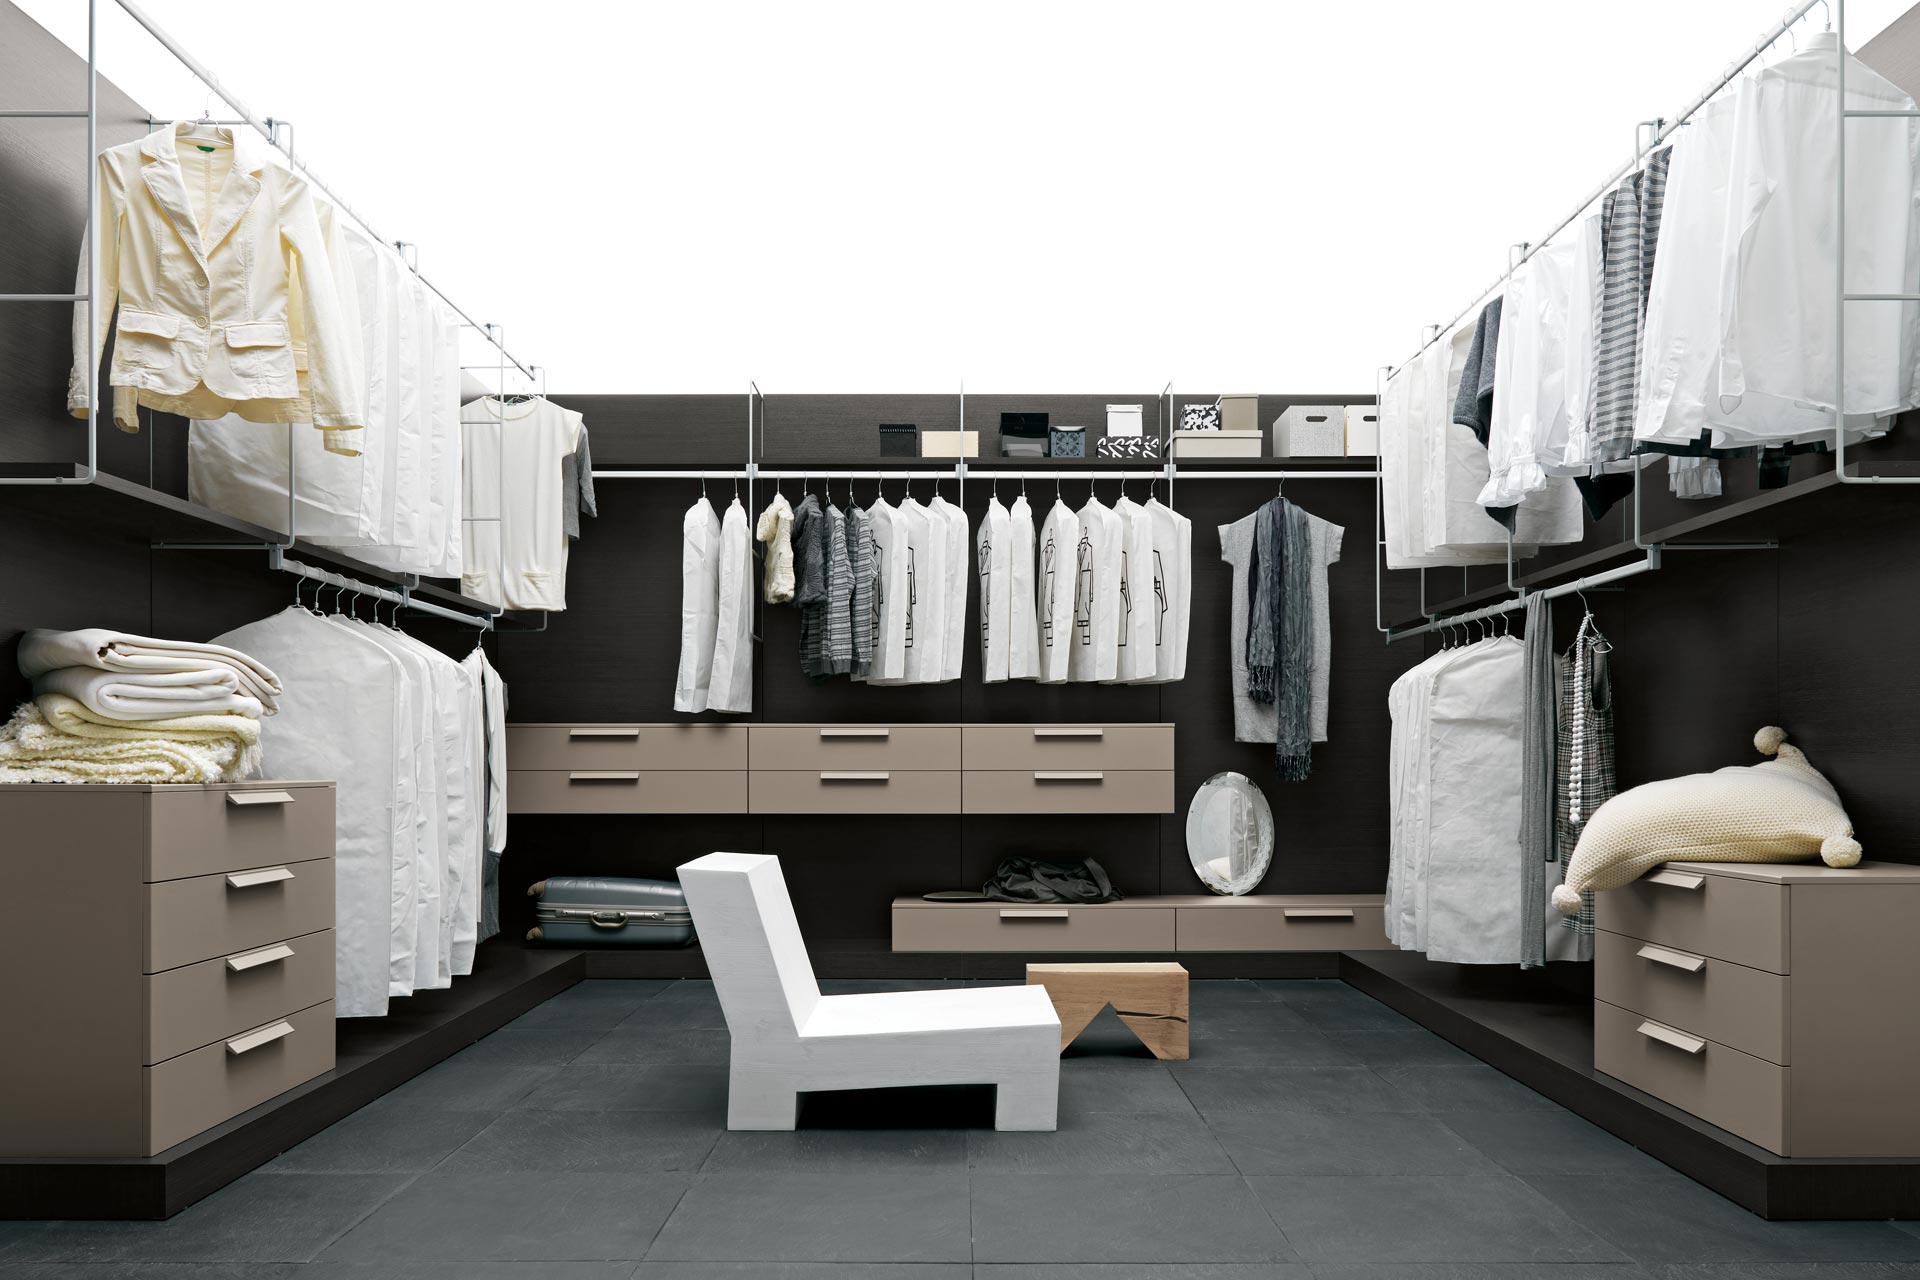 Minimalist Sleek Closet Cool Minimalist Sleek Walk In Closet Ideas Applying Black Flooring Tile Completed By Clothes Rack And Drawers Furnished With White Contemporary Chair Closet Walk In Closet Ideas: Enjoying Private Collection